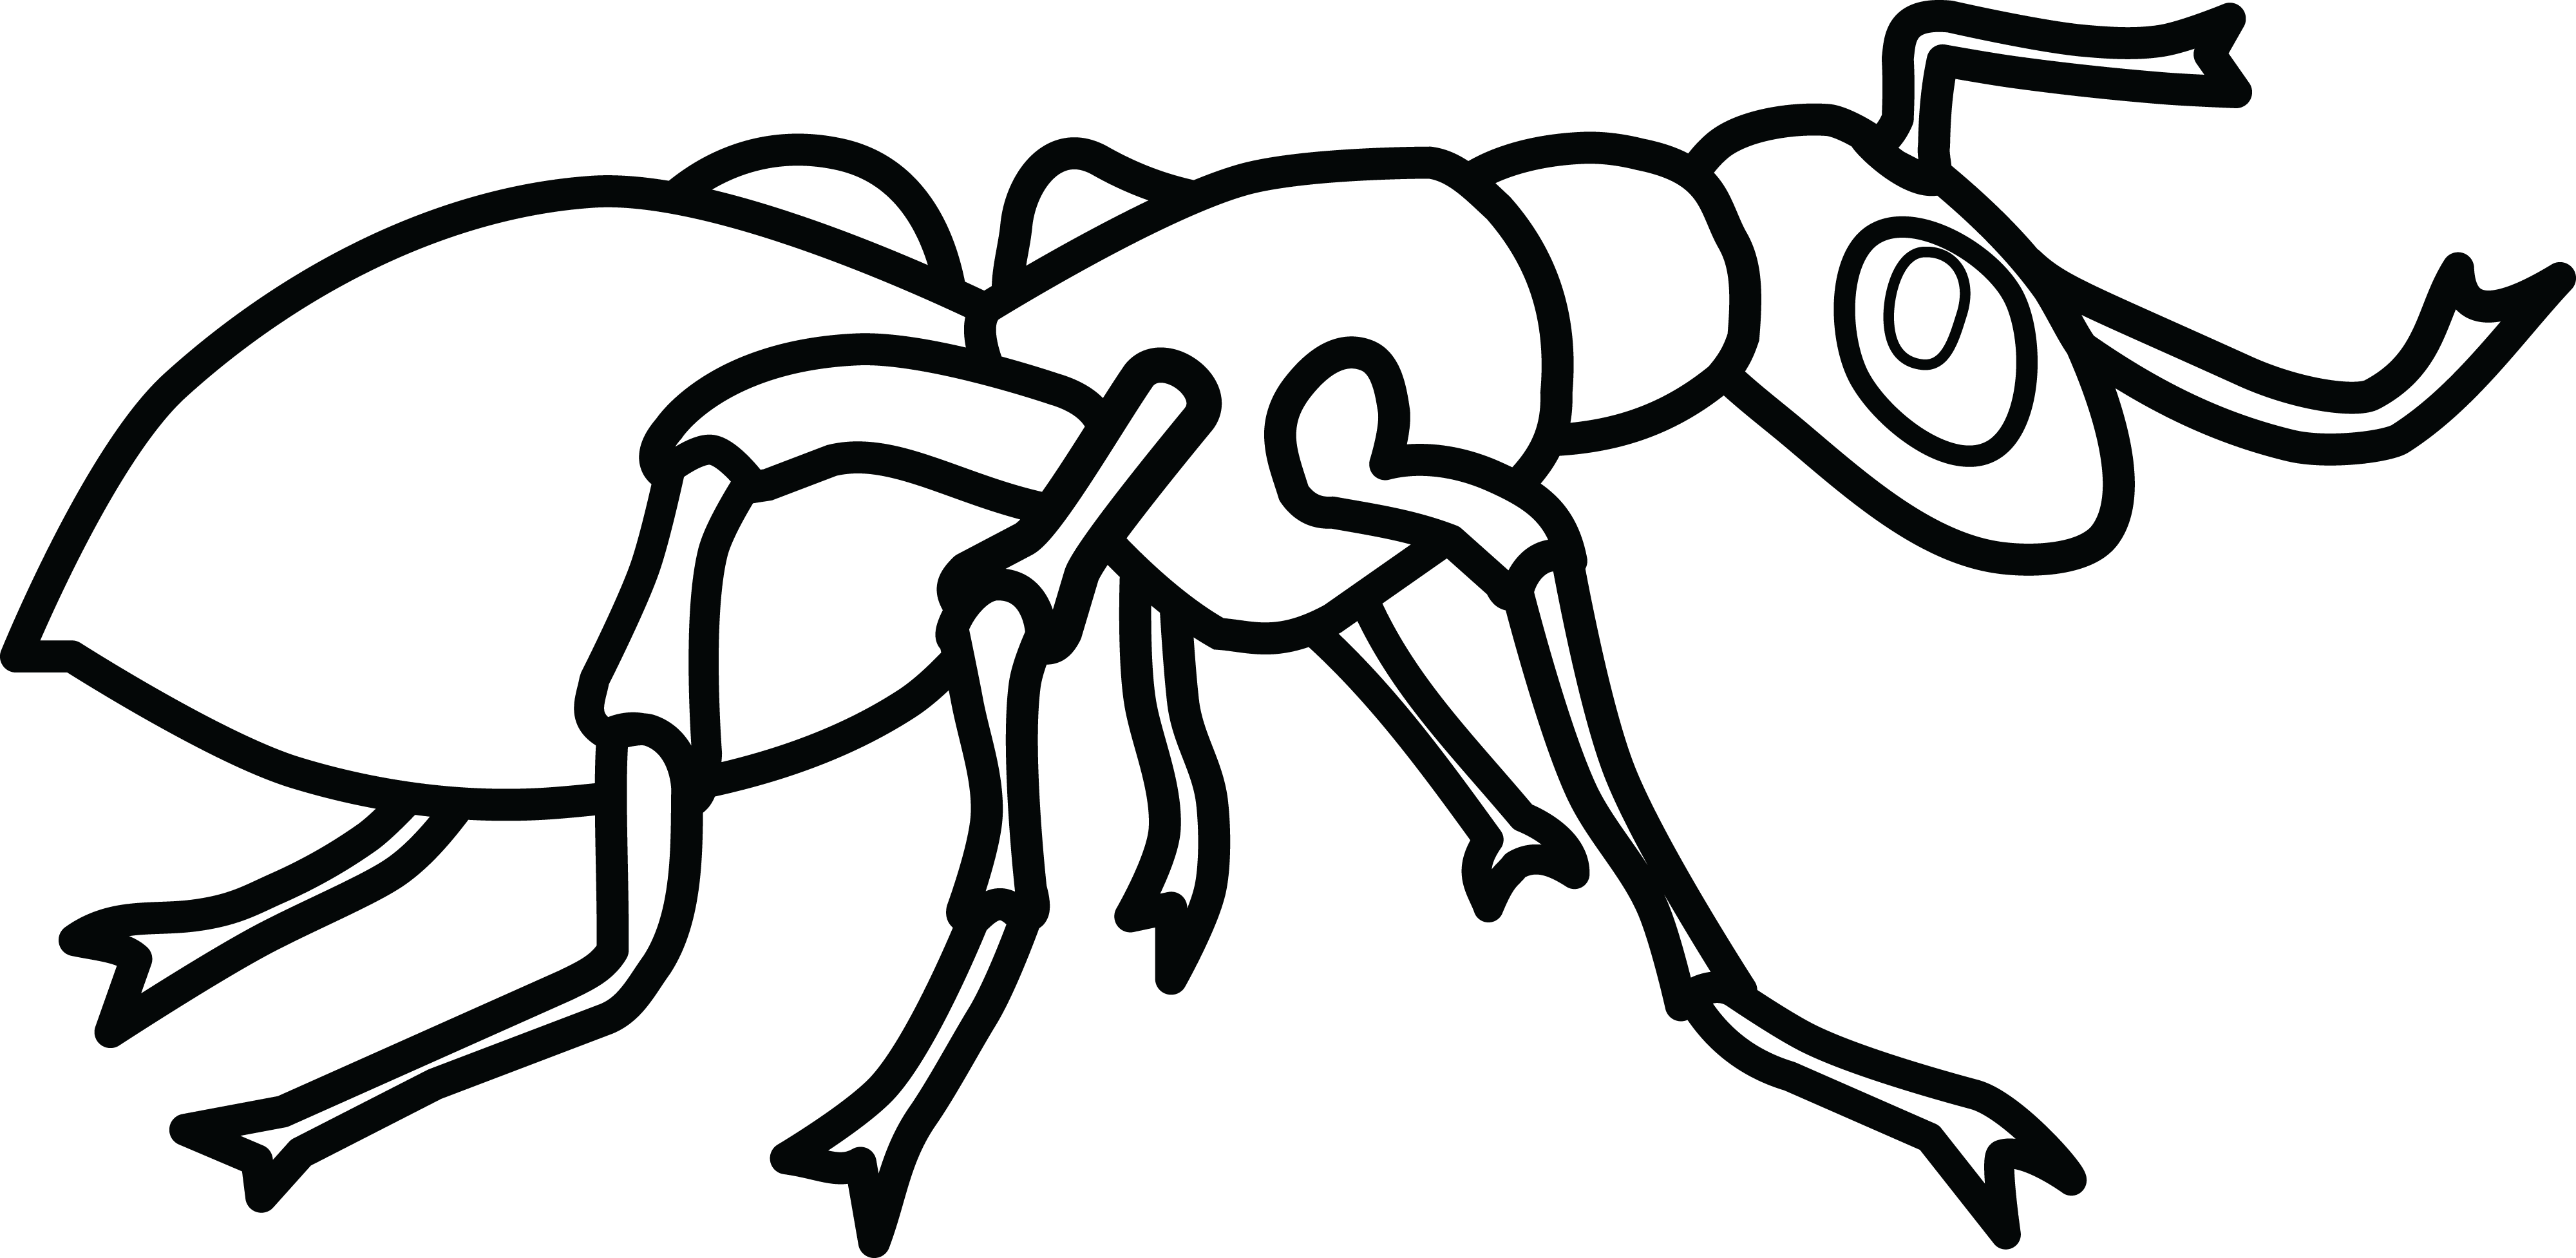 Free Clipart Of An ant_free